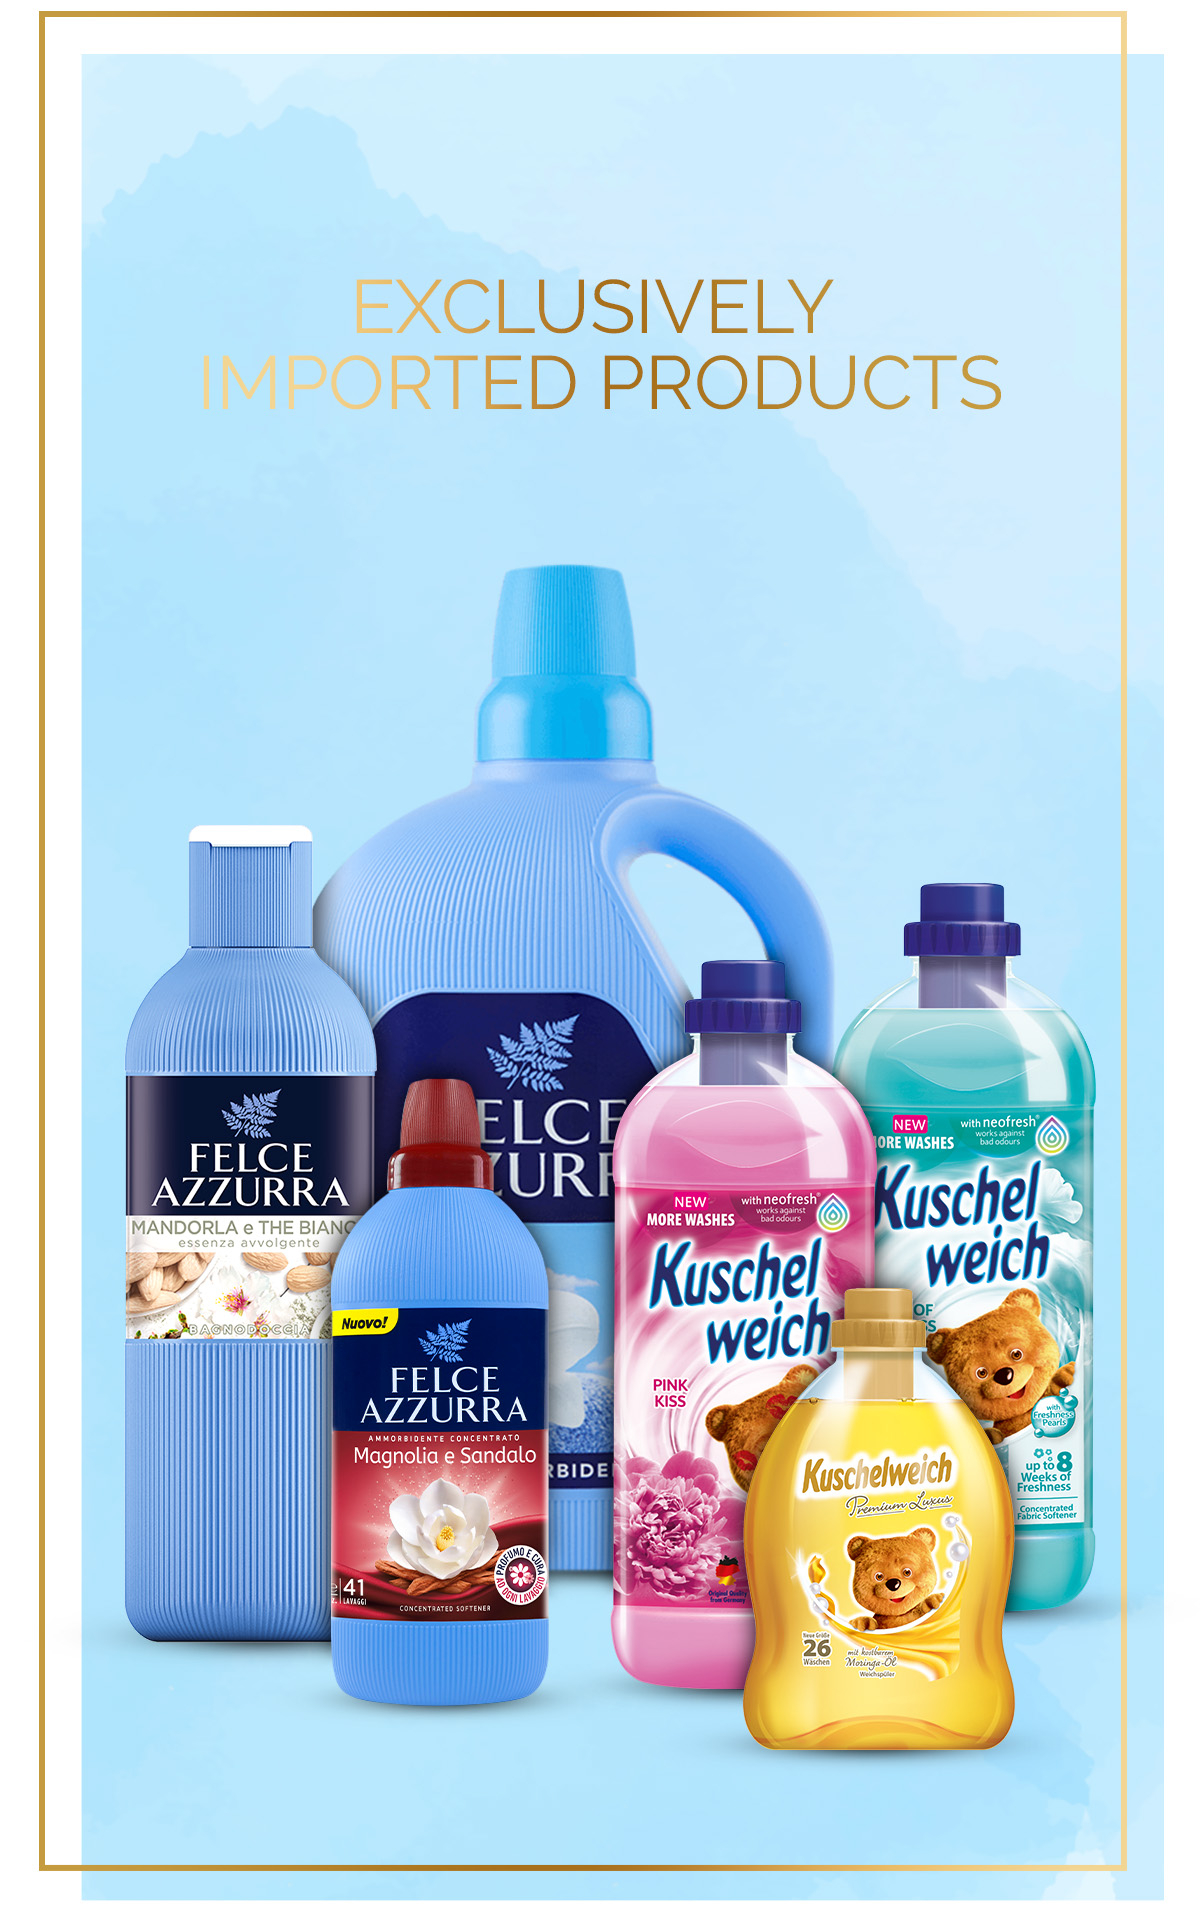 EXCLUSIVELY IMPORTED PRODUCTS